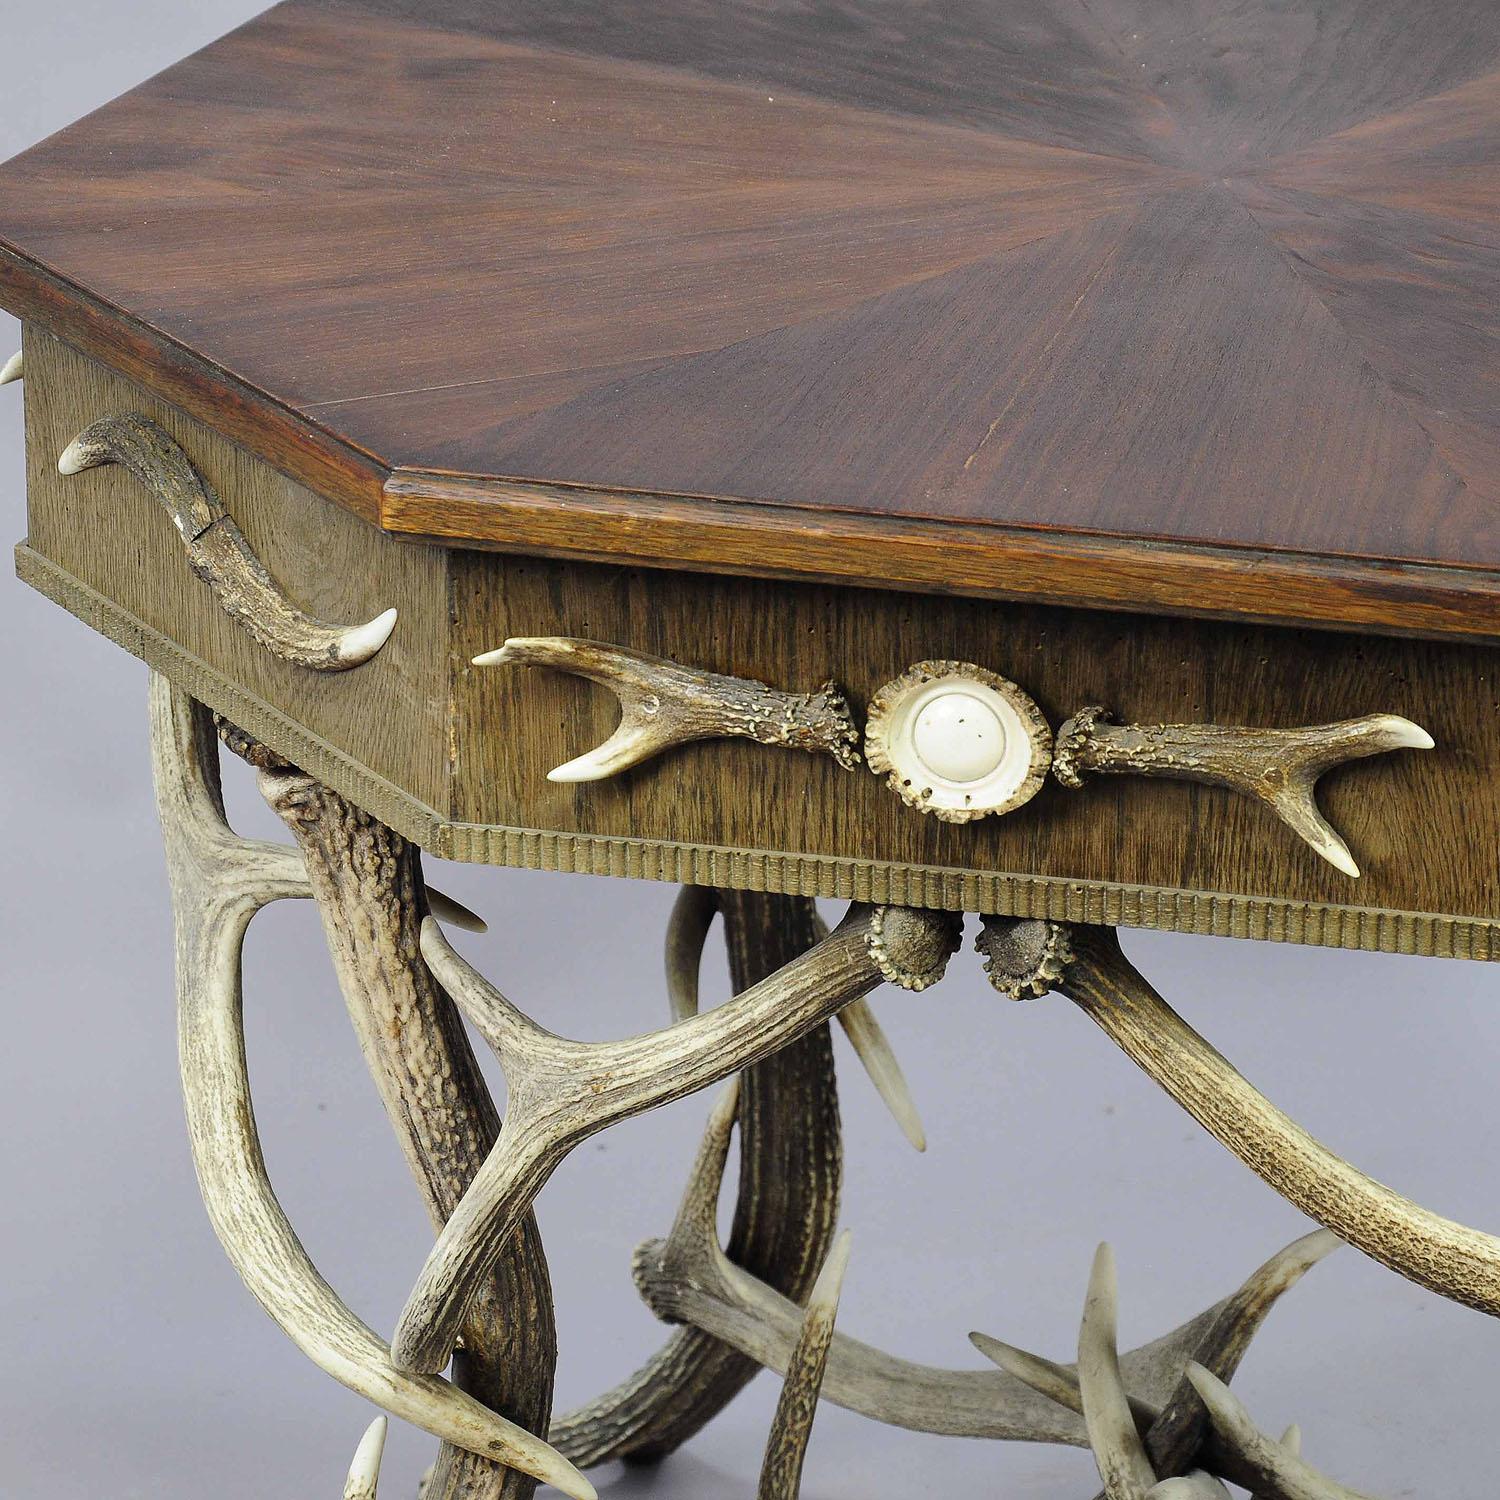 Italian Antique Black Forest Rustic Antler Table ca. 1900 For Sale